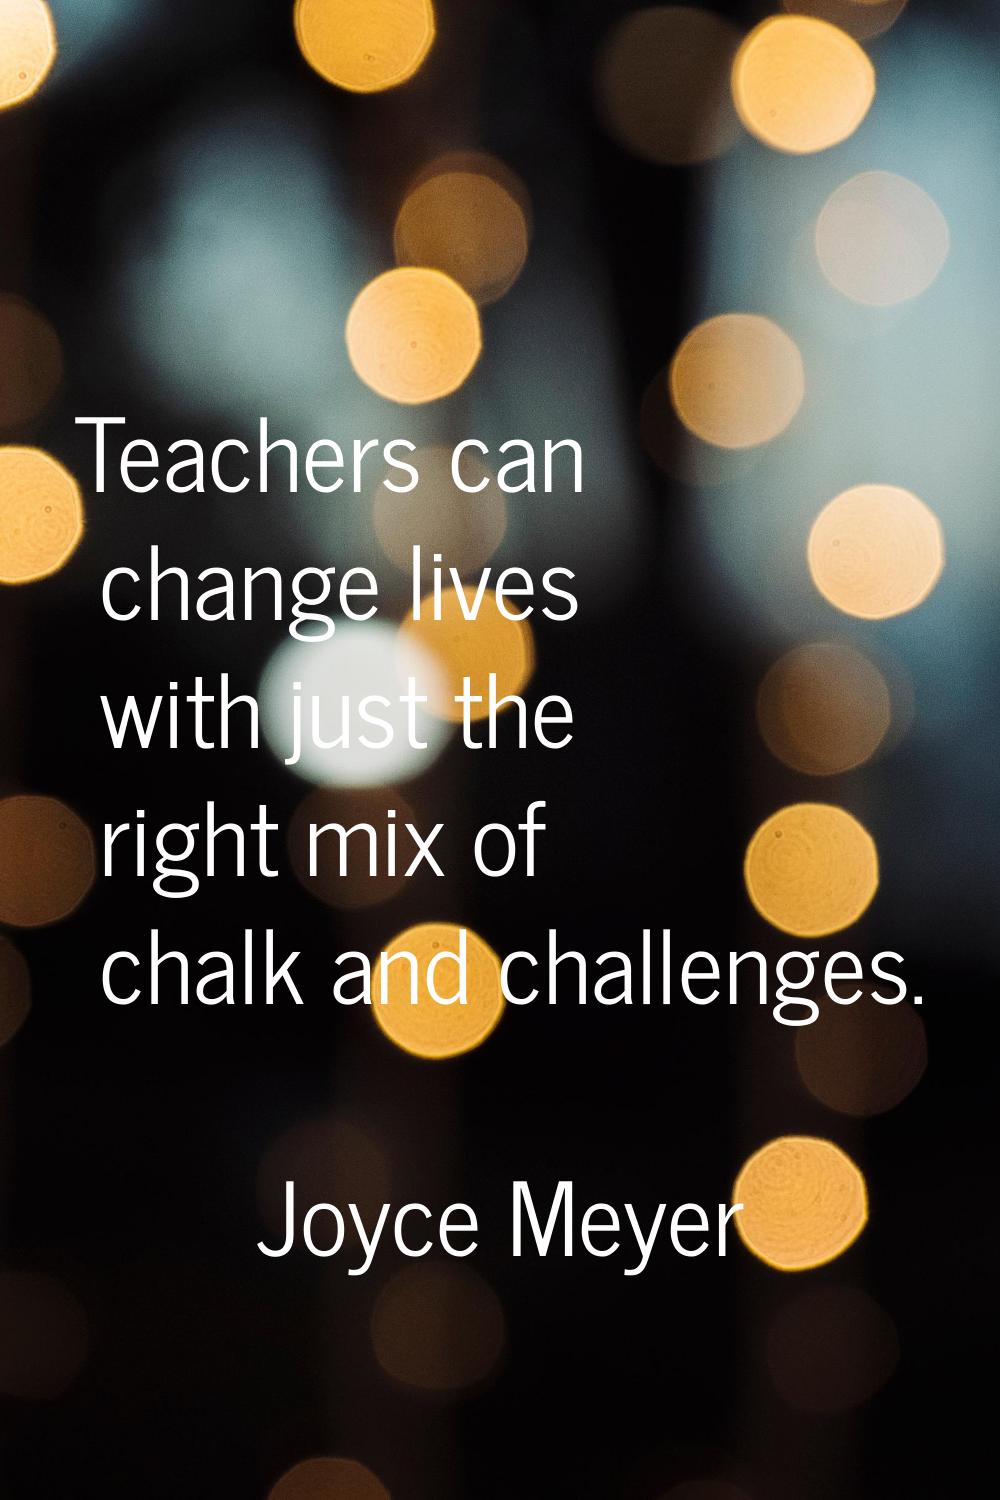 Teachers can change lives with just the right mix of chalk and challenges.